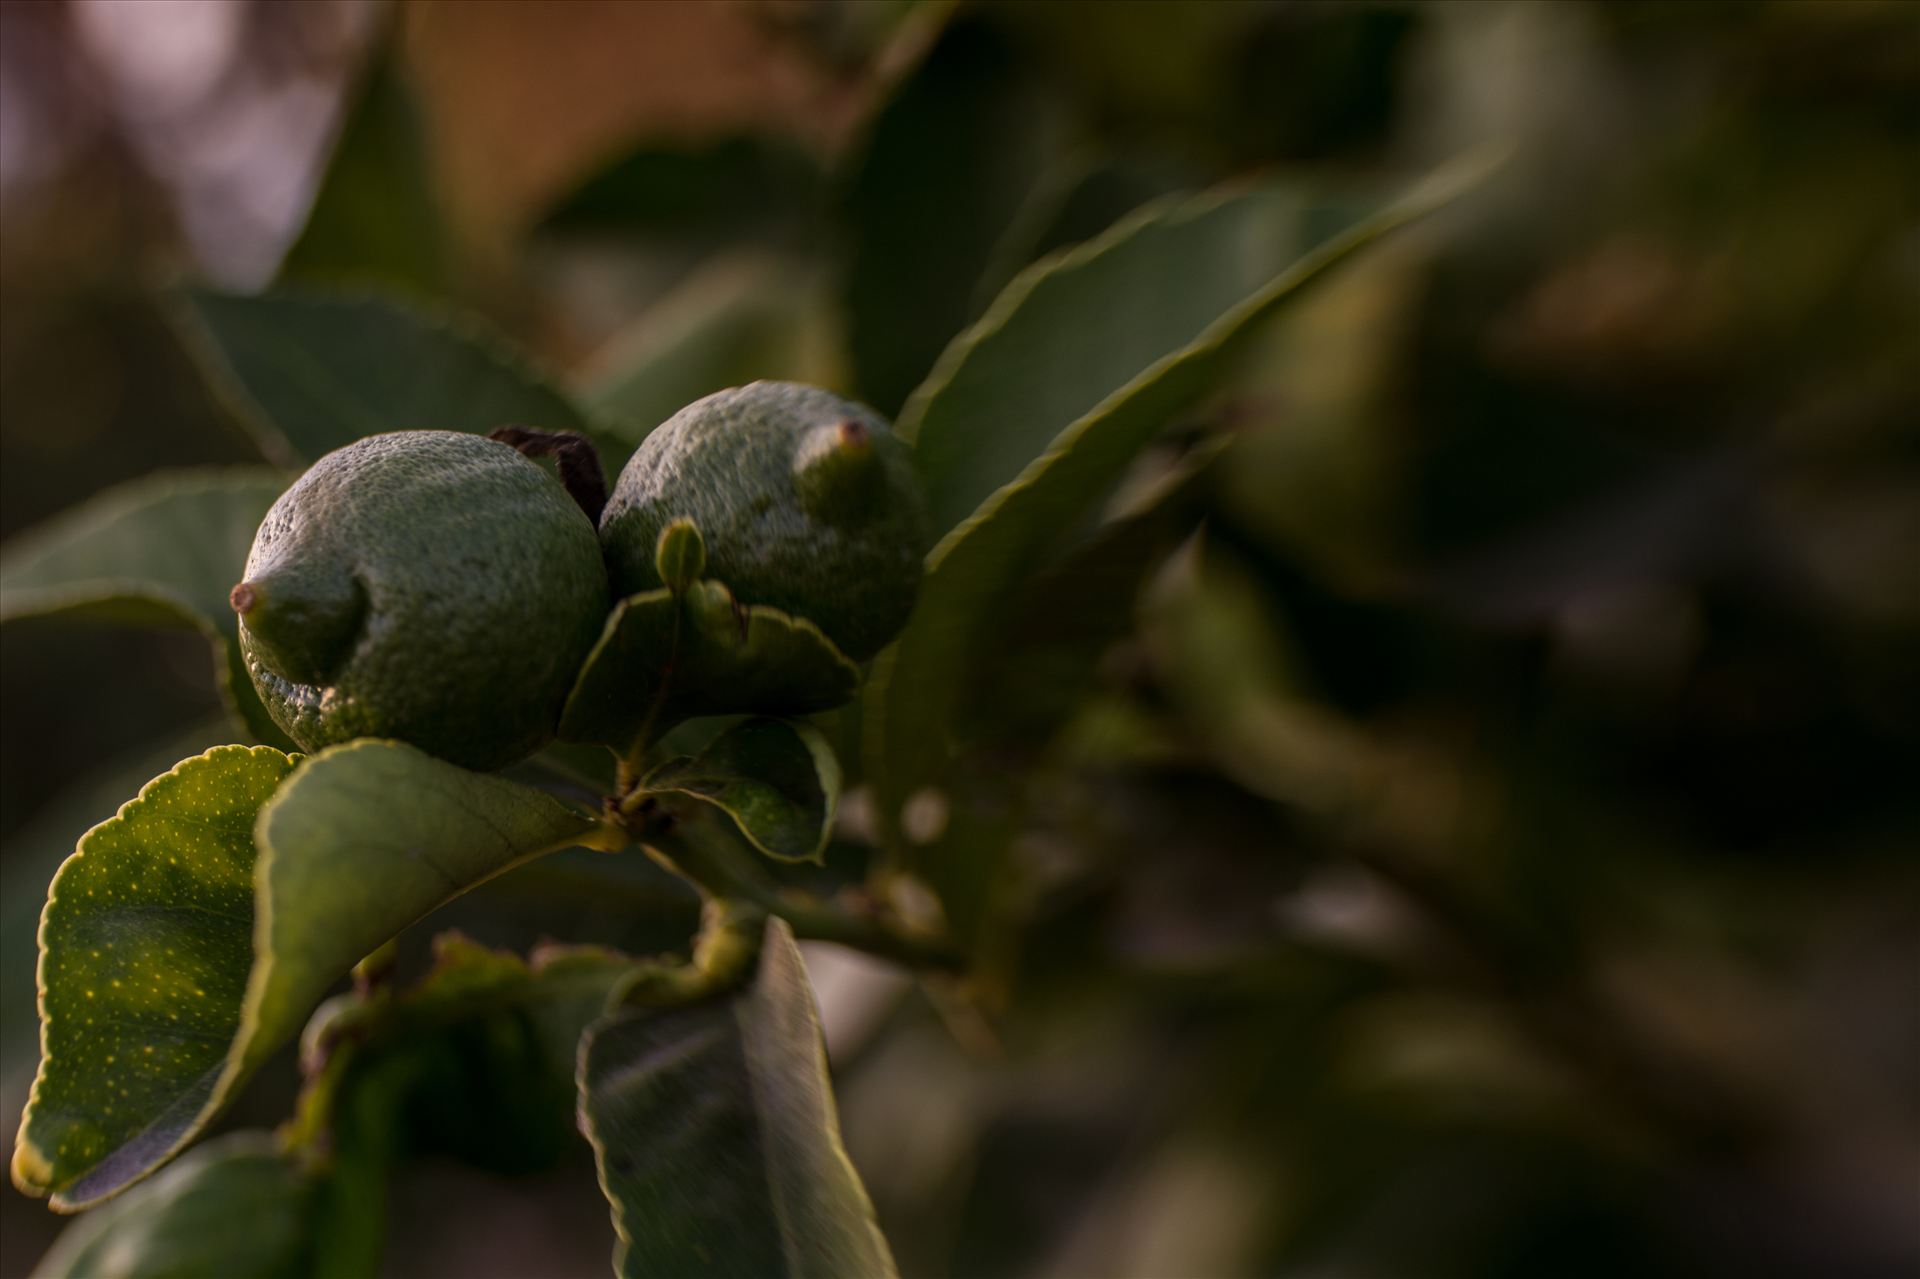 Lovely Limes 092615.jpg Last of the limes in California in October by Sarah Williams